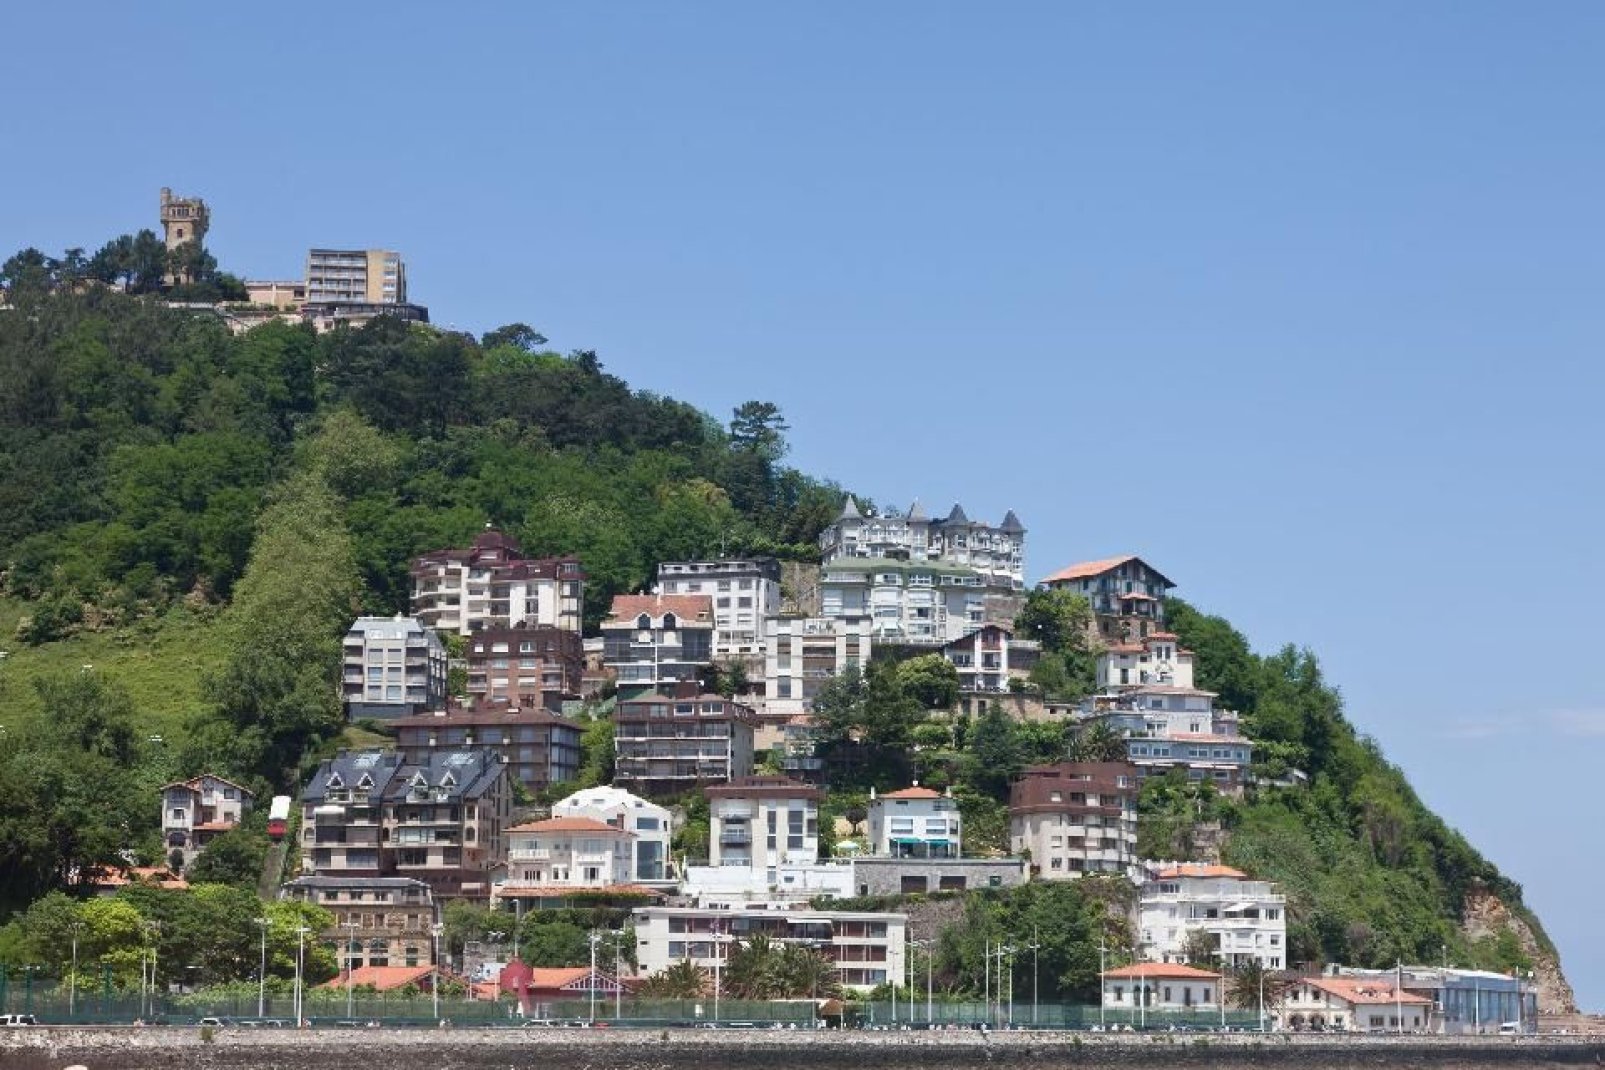 More than just a district, Igueldo is one of San Sebastian's three mountains. Located in the west of the city, it has a small urban centre and a vast residential zone.